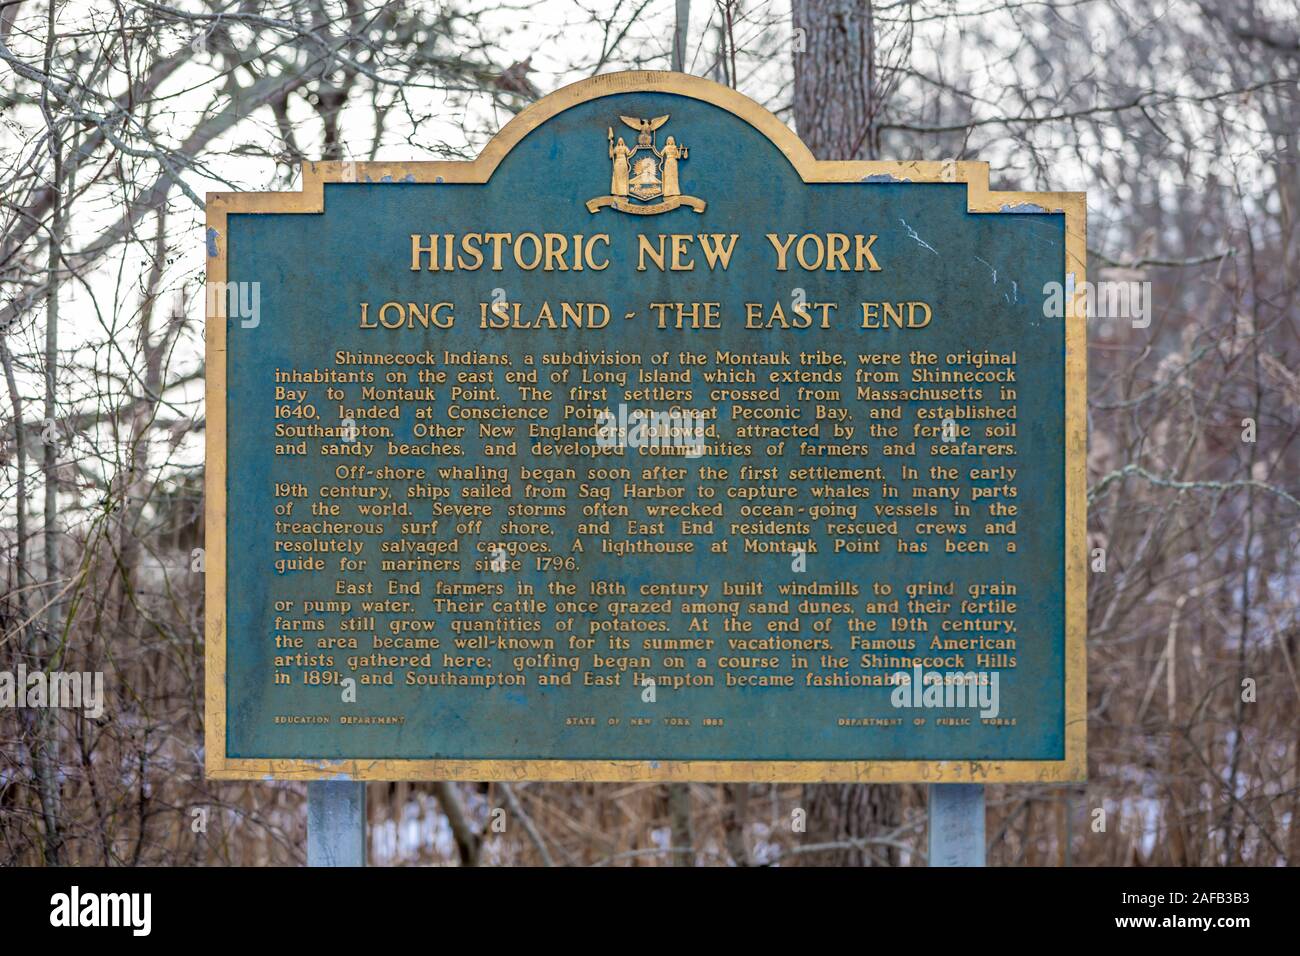 NY state sign for Historic New York, Long Island, The east end, long island, NY Stock Photo